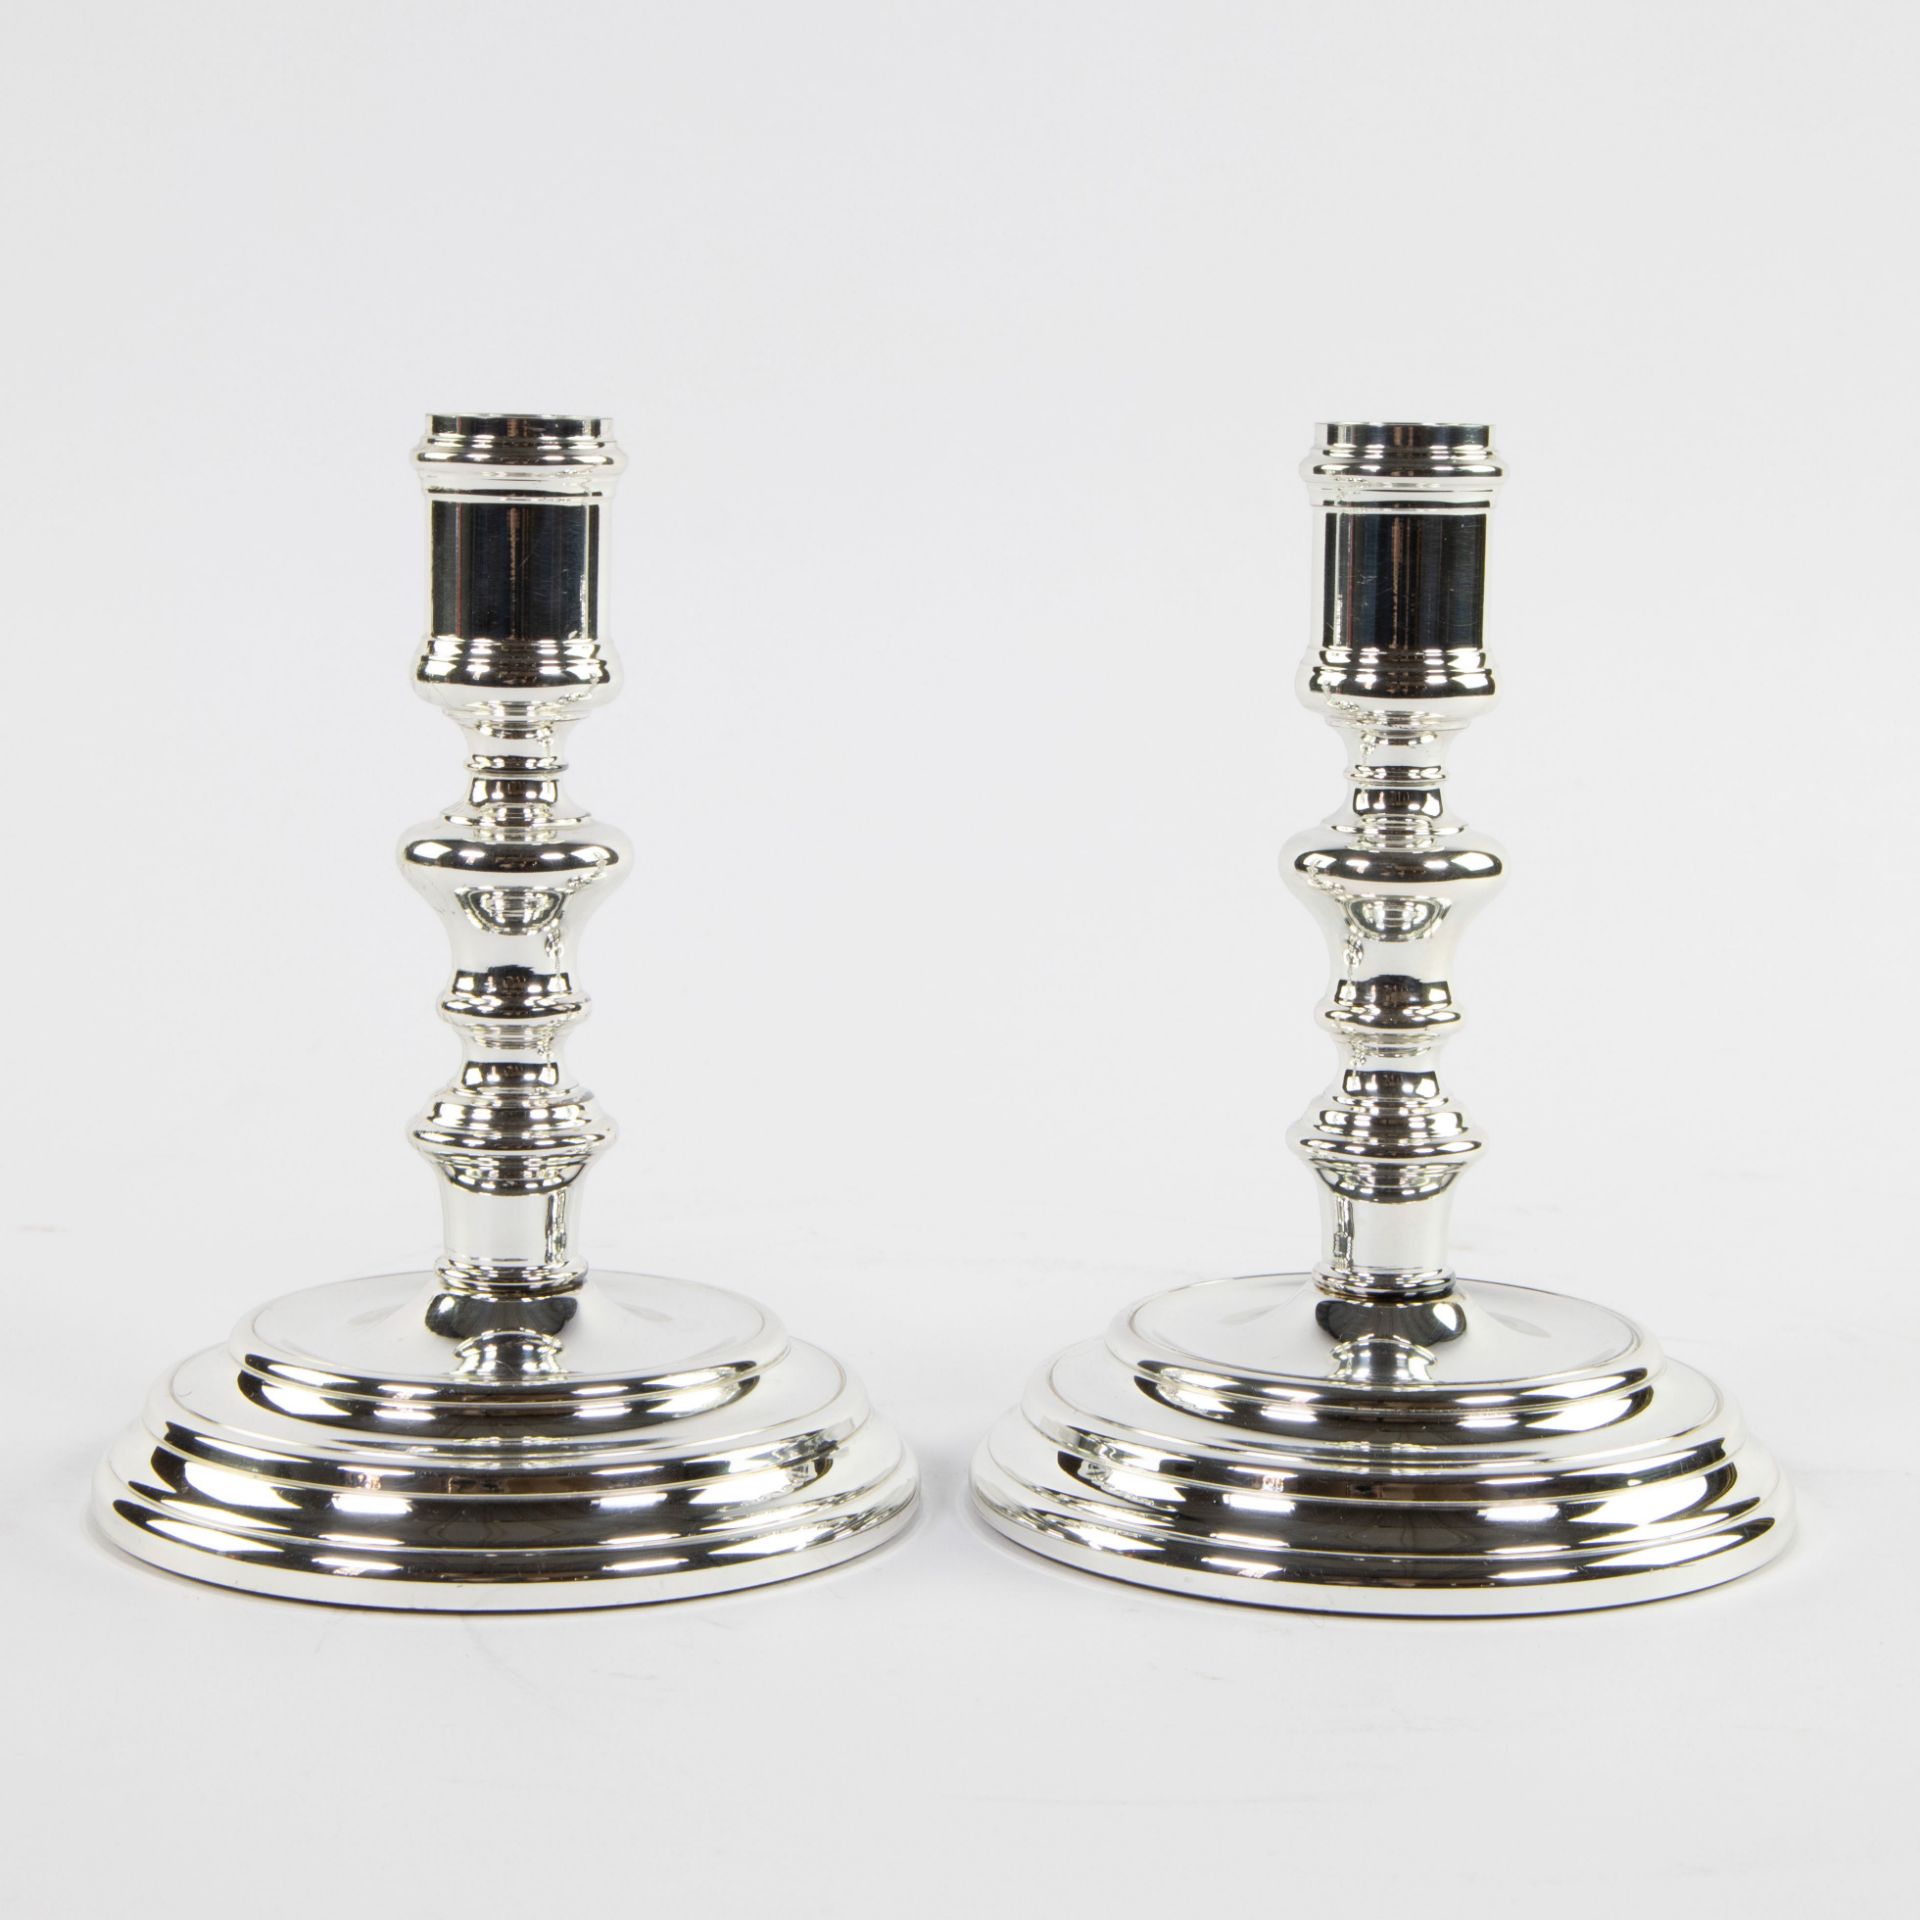 A pair of Christofle candlesticks, marked